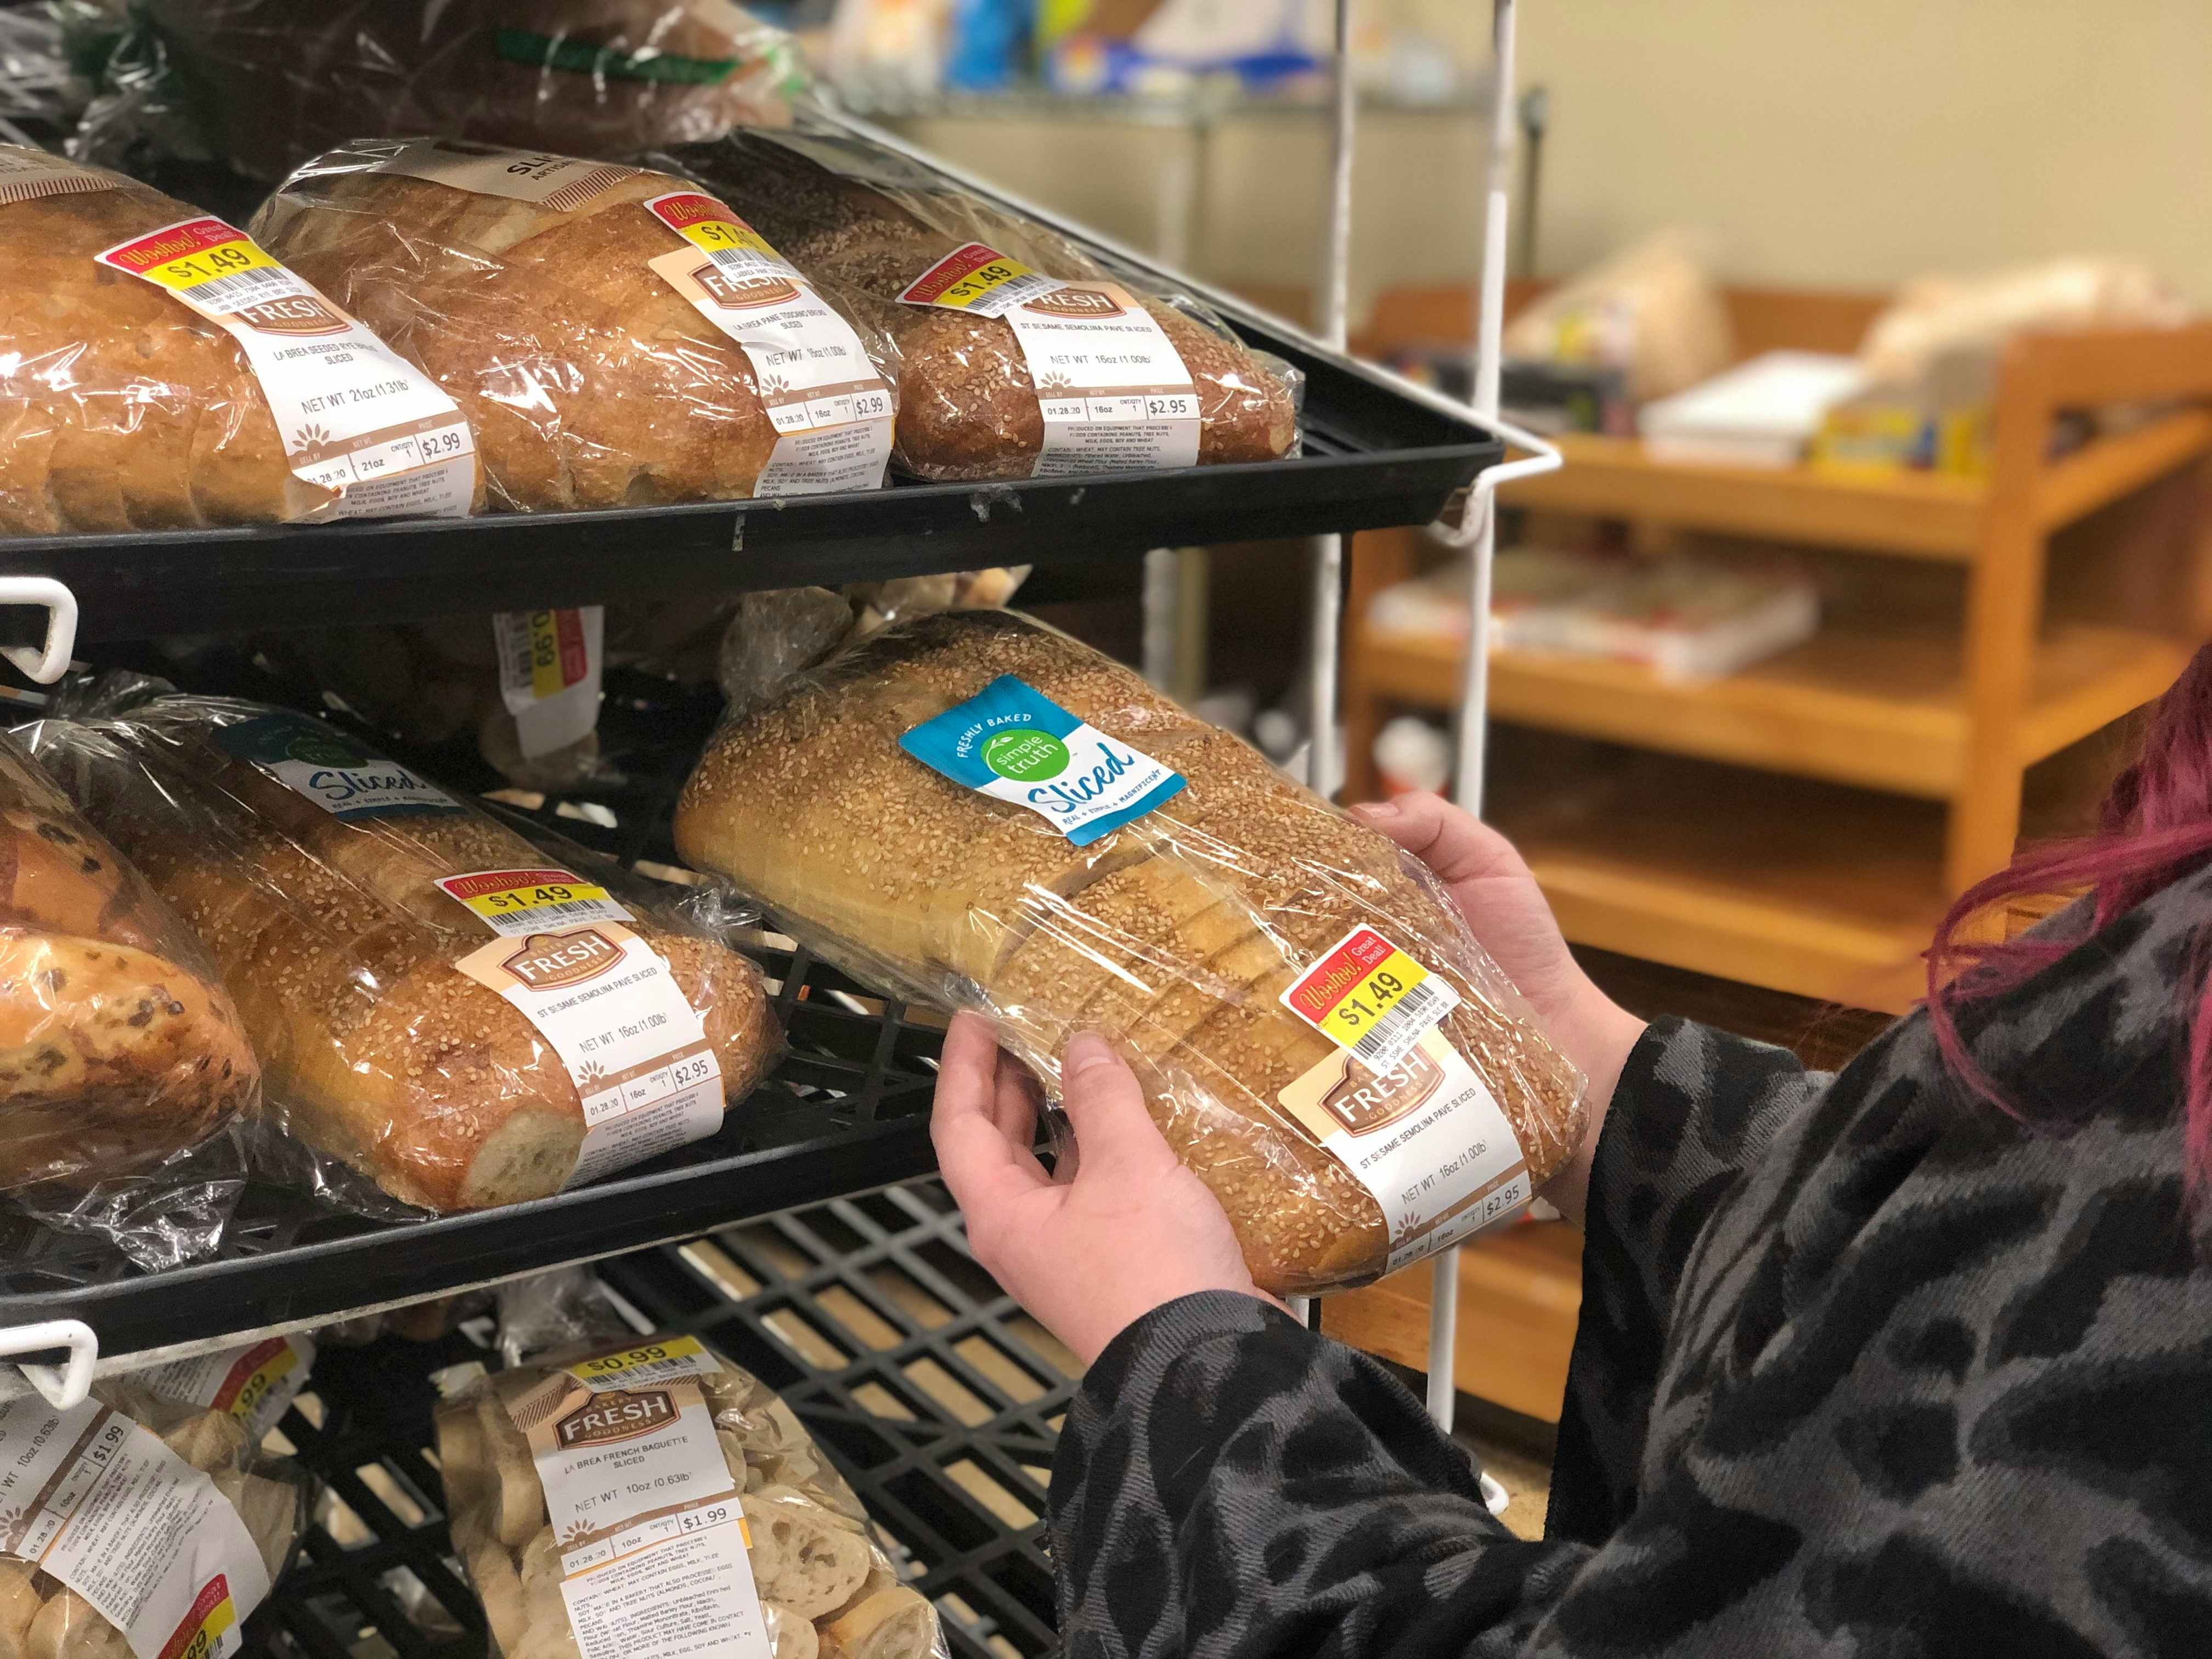 A woman shops for bread in the clearance section.